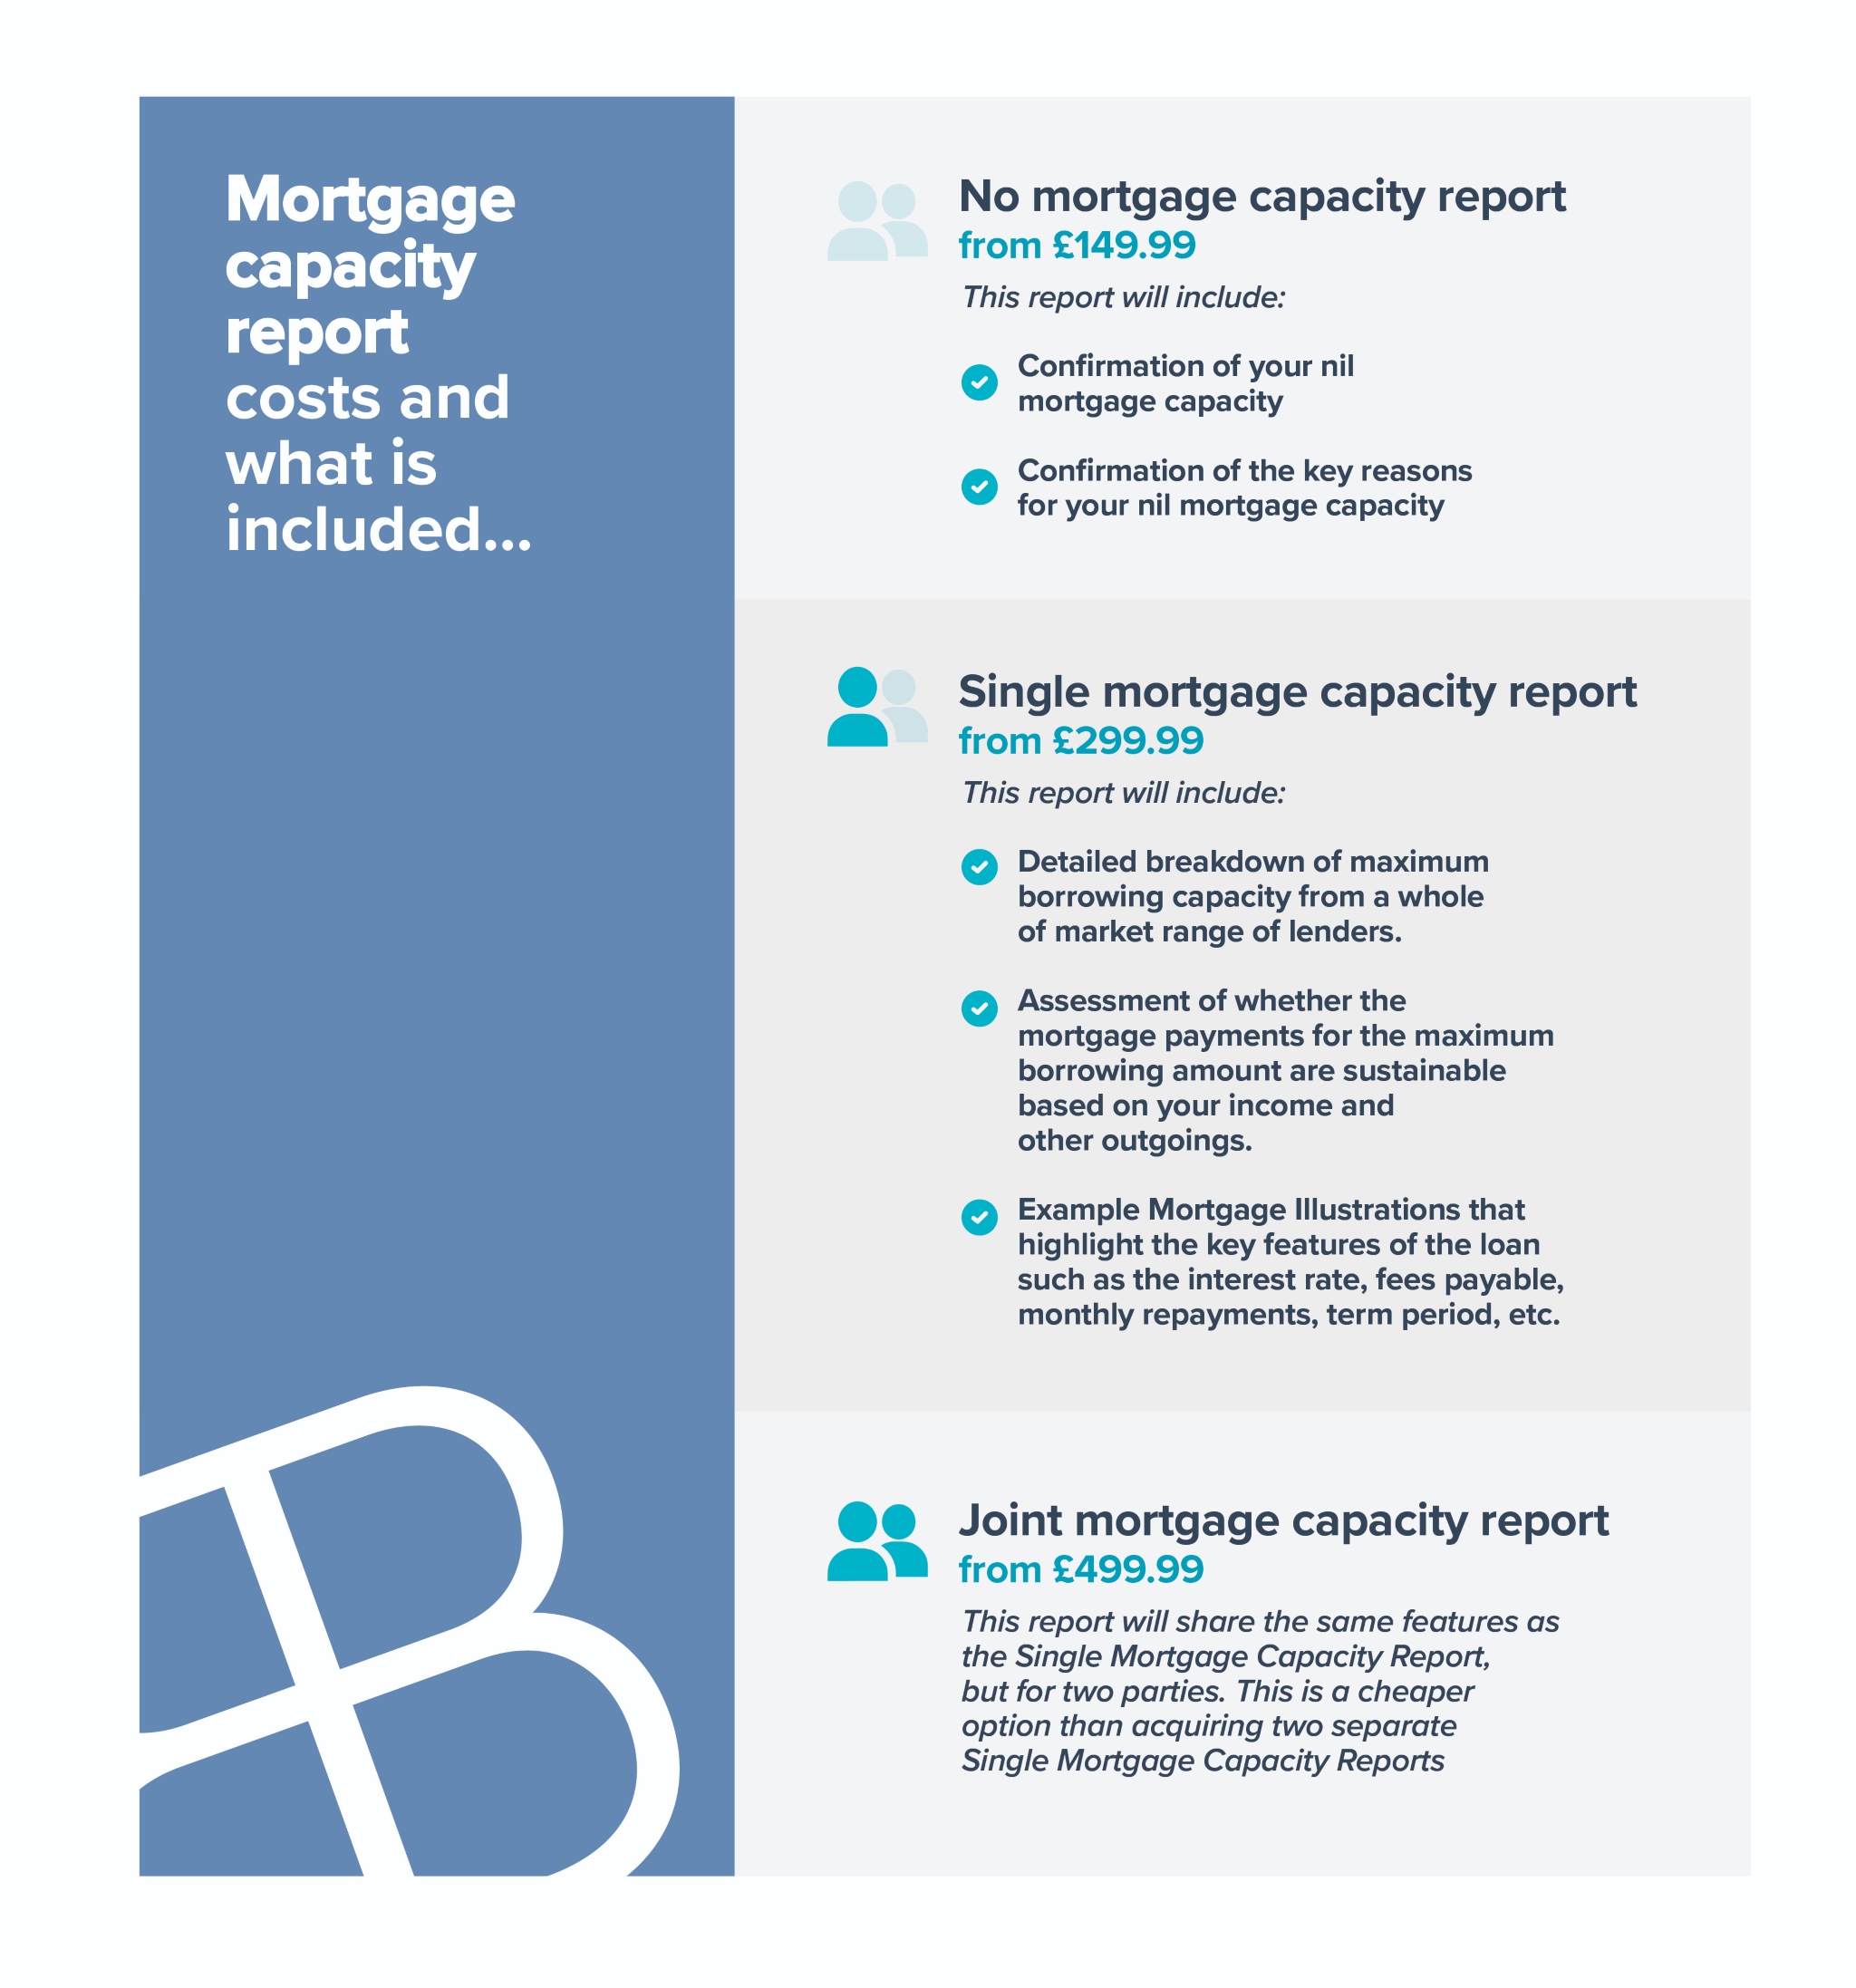 mortgage capacity report cost infographic